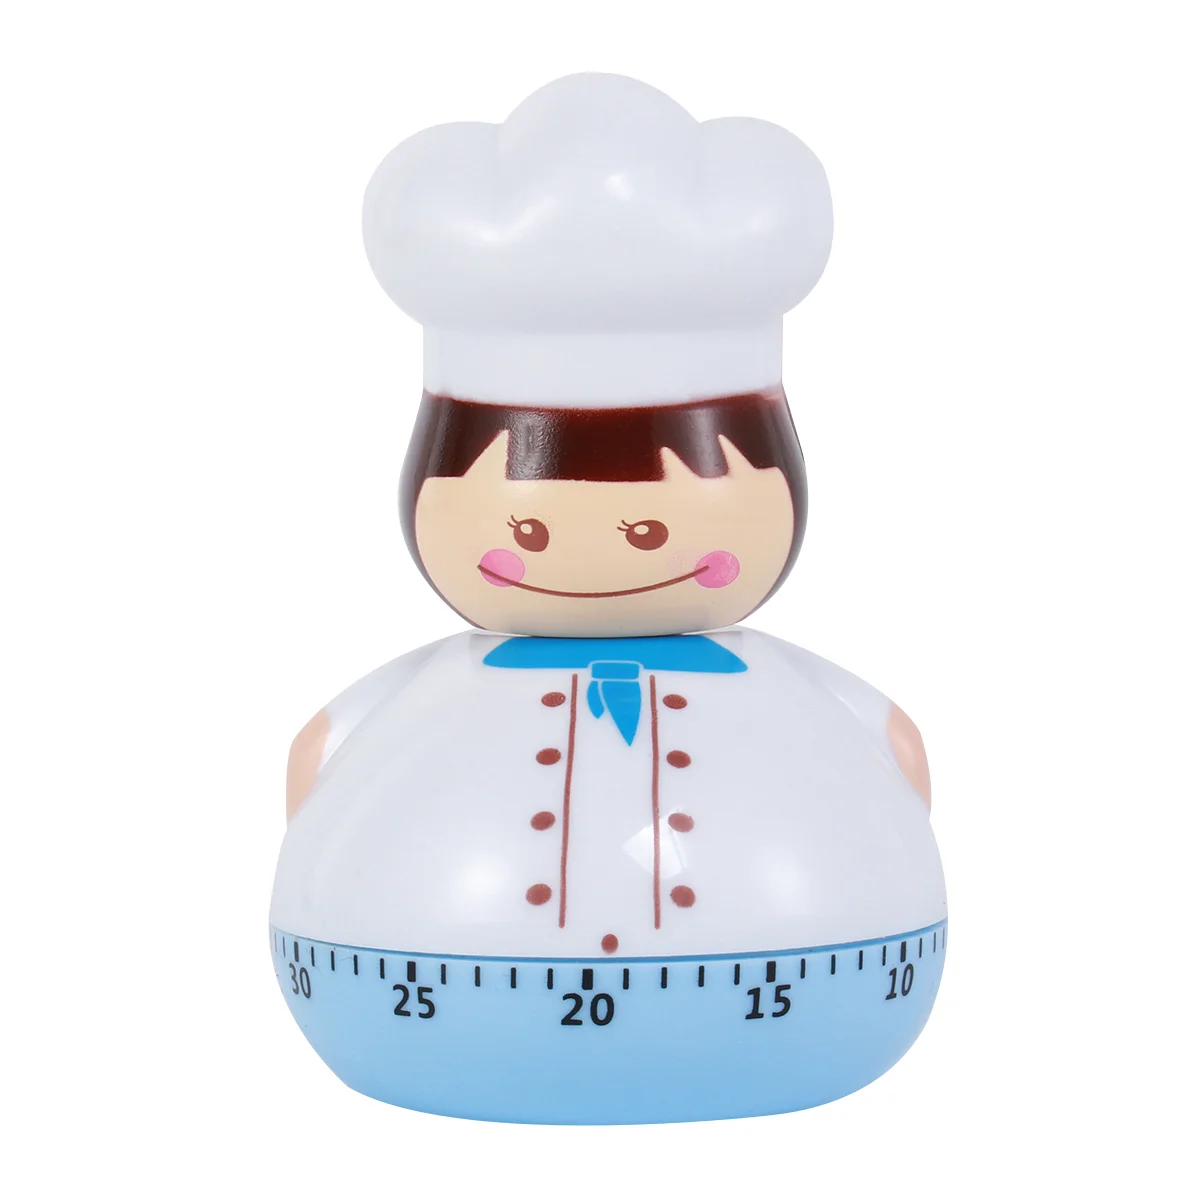 

Timer Kitchen Cooking Timers Digital Baking Chef Countdown Reminder Alarm Egg Mechanical Cute Clock Loud Time Manual Household